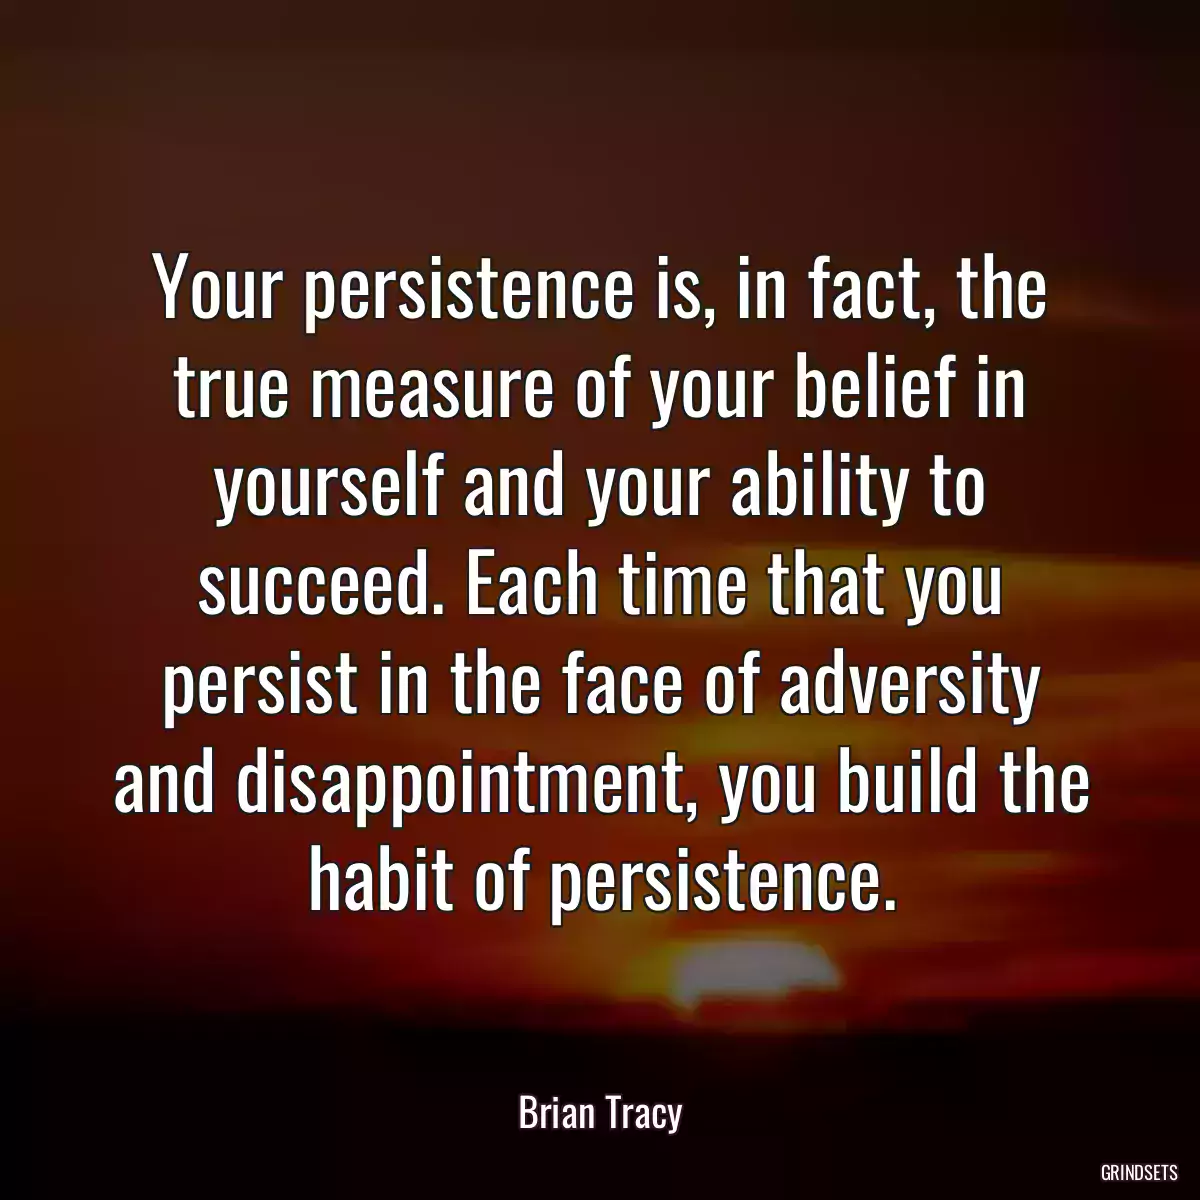 Your persistence is, in fact, the true measure of your belief in yourself and your ability to succeed. Each time that you persist in the face of adversity and disappointment, you build the habit of persistence.